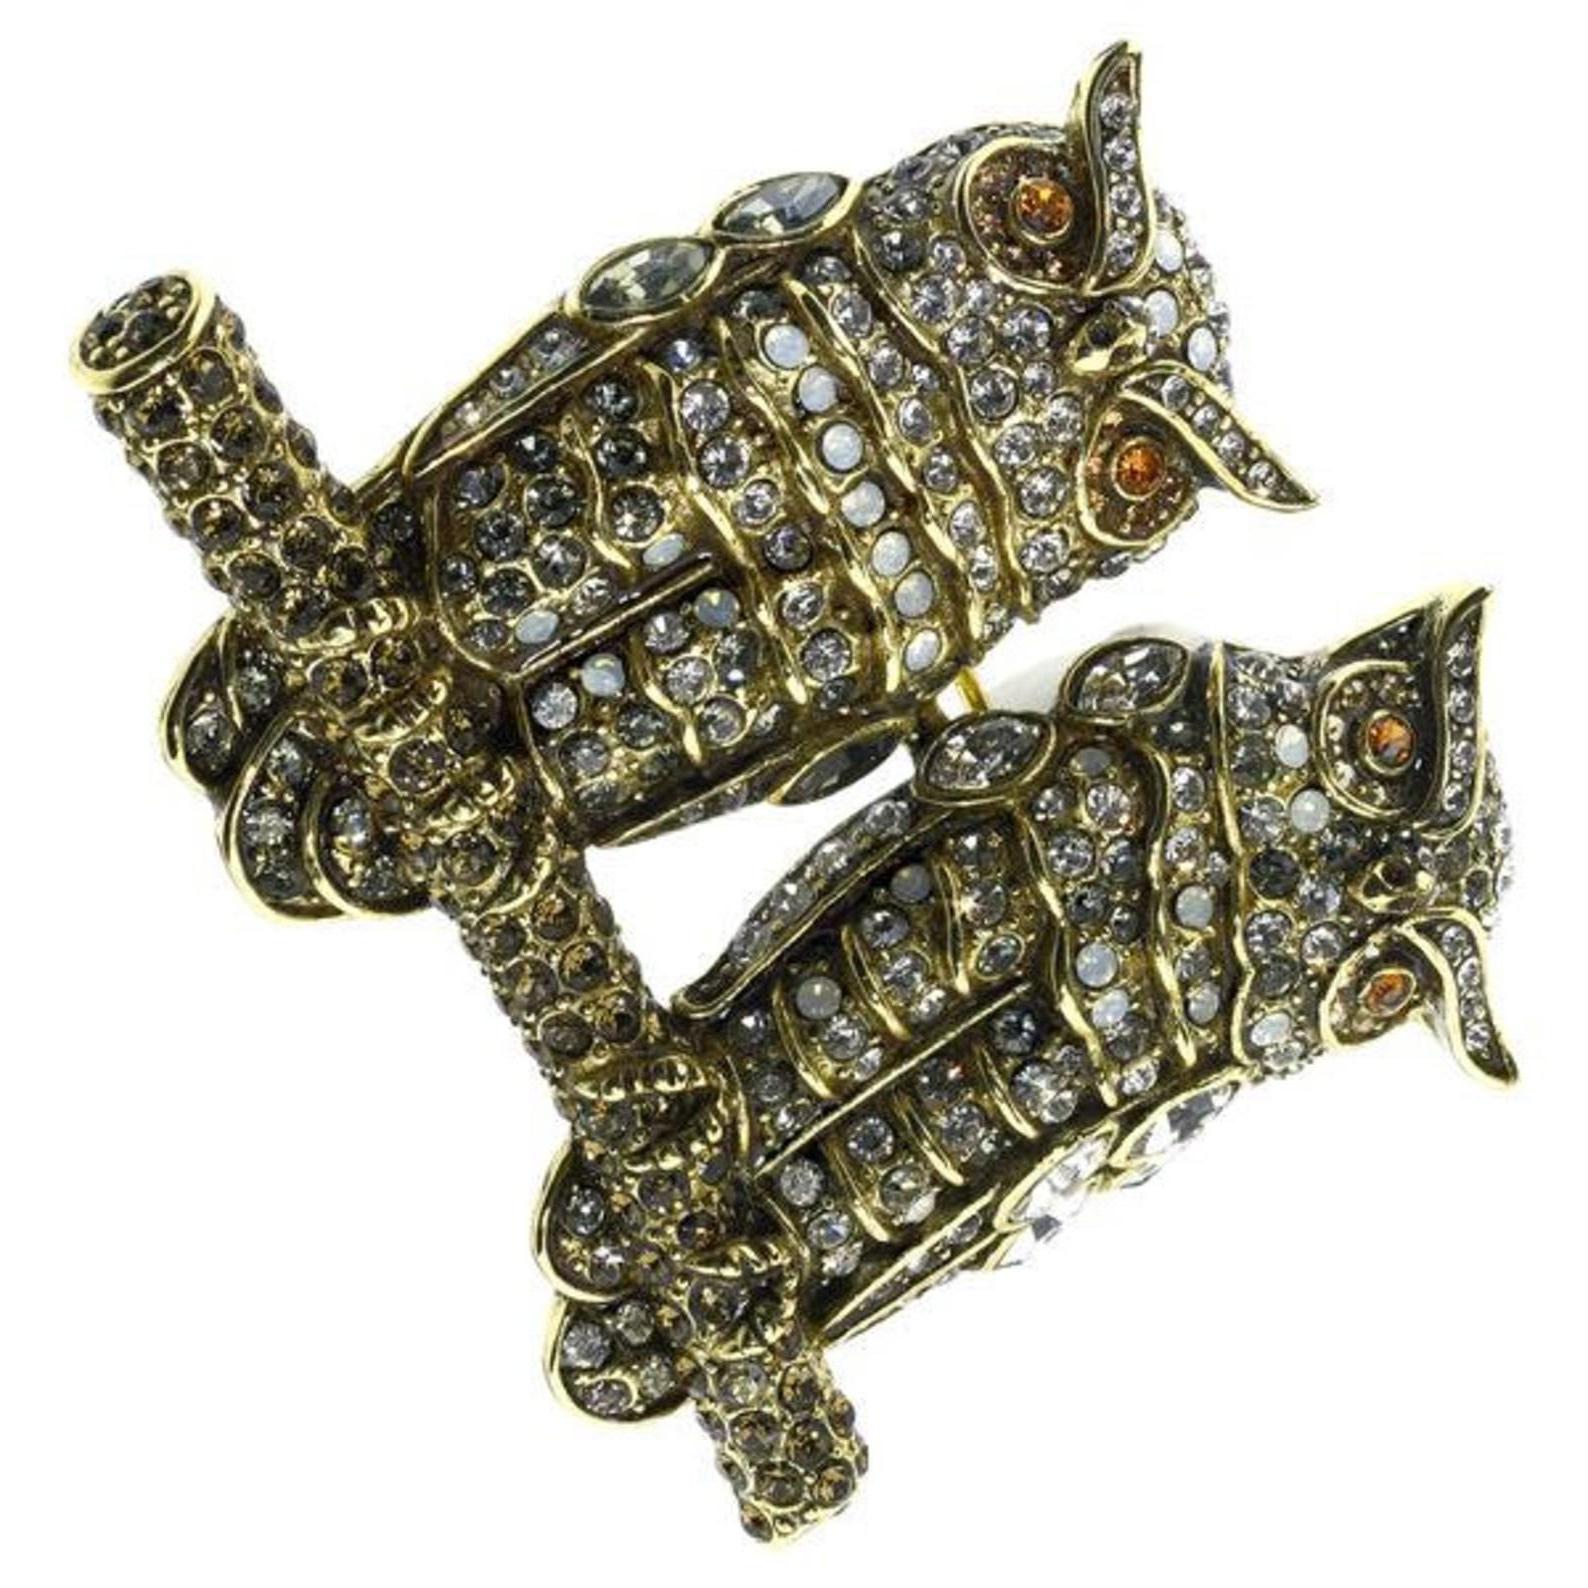 This beguiling pair of owls will enliven every item in your wardrobe. Our Couple Of Owls Crystal Pin features two dazzling owls, fitted with diamond, black diamond, white opal, topaz, smoky quarts, and crystal golden shadow crystals. They sit